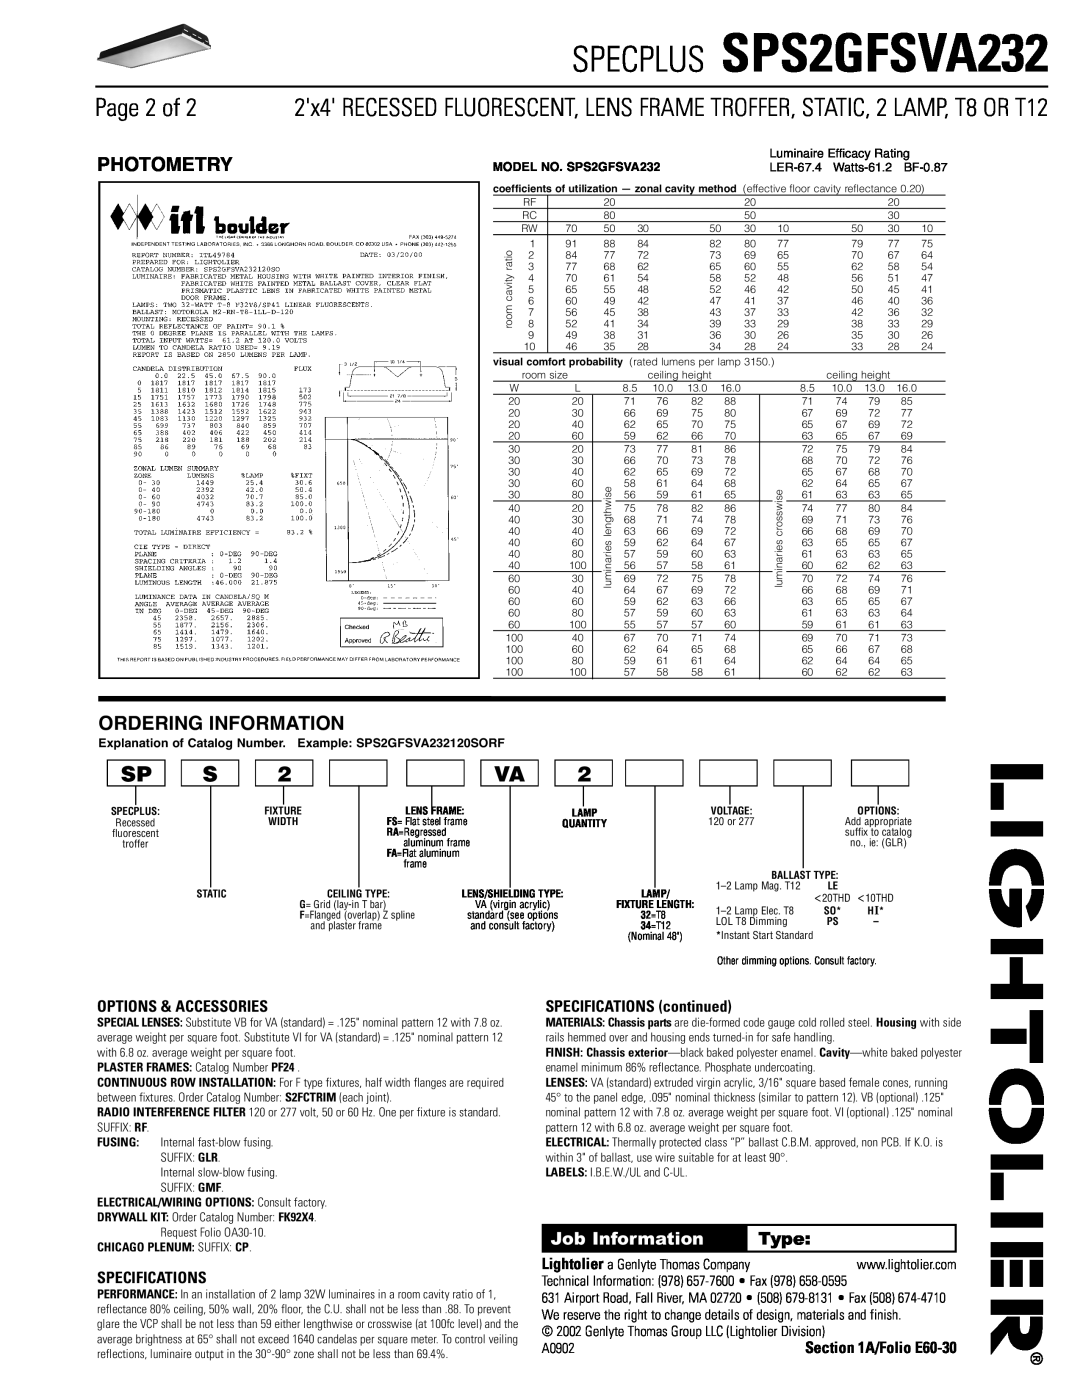 Lightolier Page 2 of, Photometry, Ordering Information, SPECPLUS SPS2GFSVA232, Job Information, Type, Specifications 